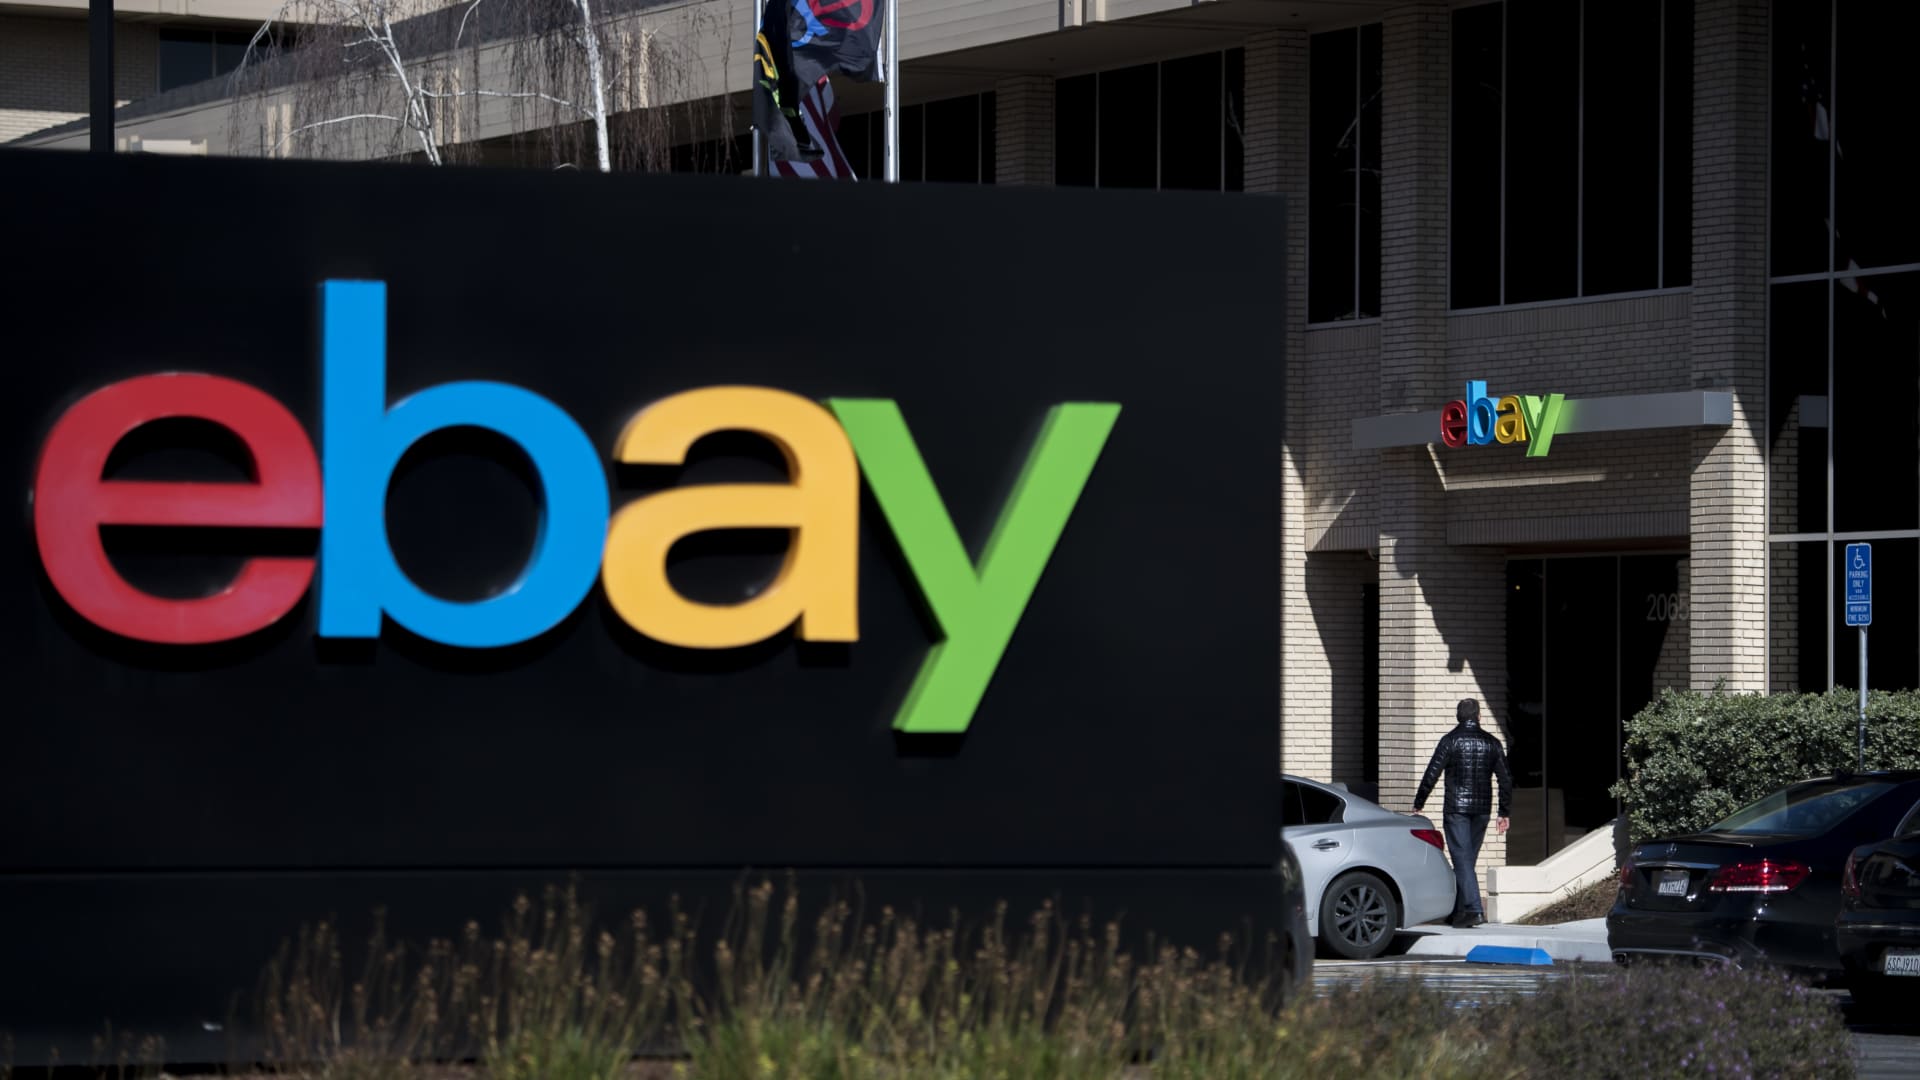 EBay to slash about 1,000 roles, or 9% of full-time employees